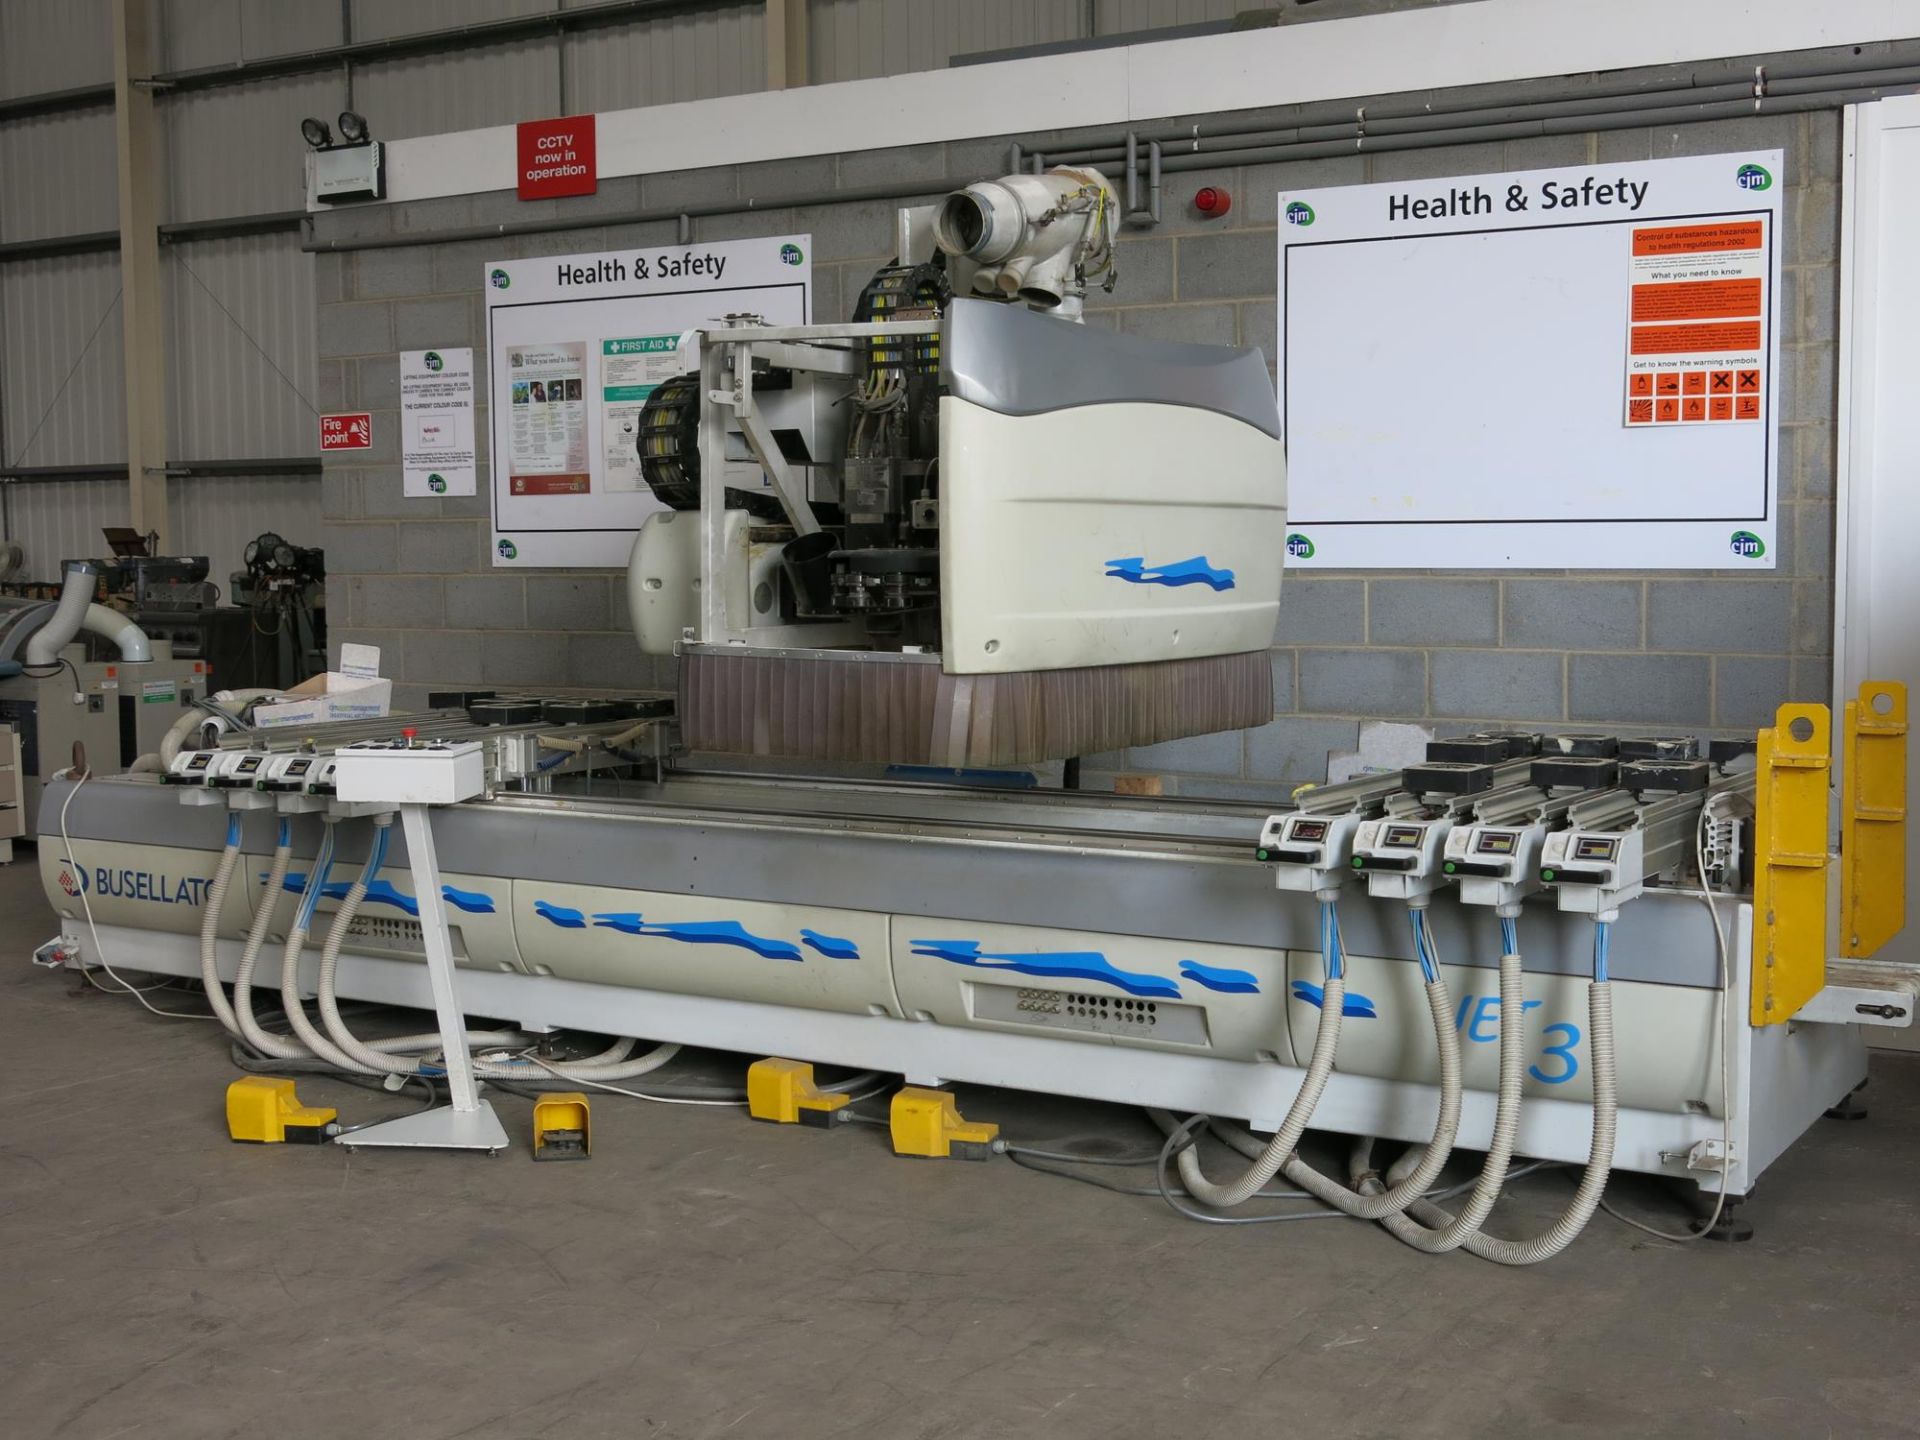 *Busellato Jet 3000 XL CNC Router, Year of Manufacture 2004, Serial No 5742, 26kW, 3PH, comes with